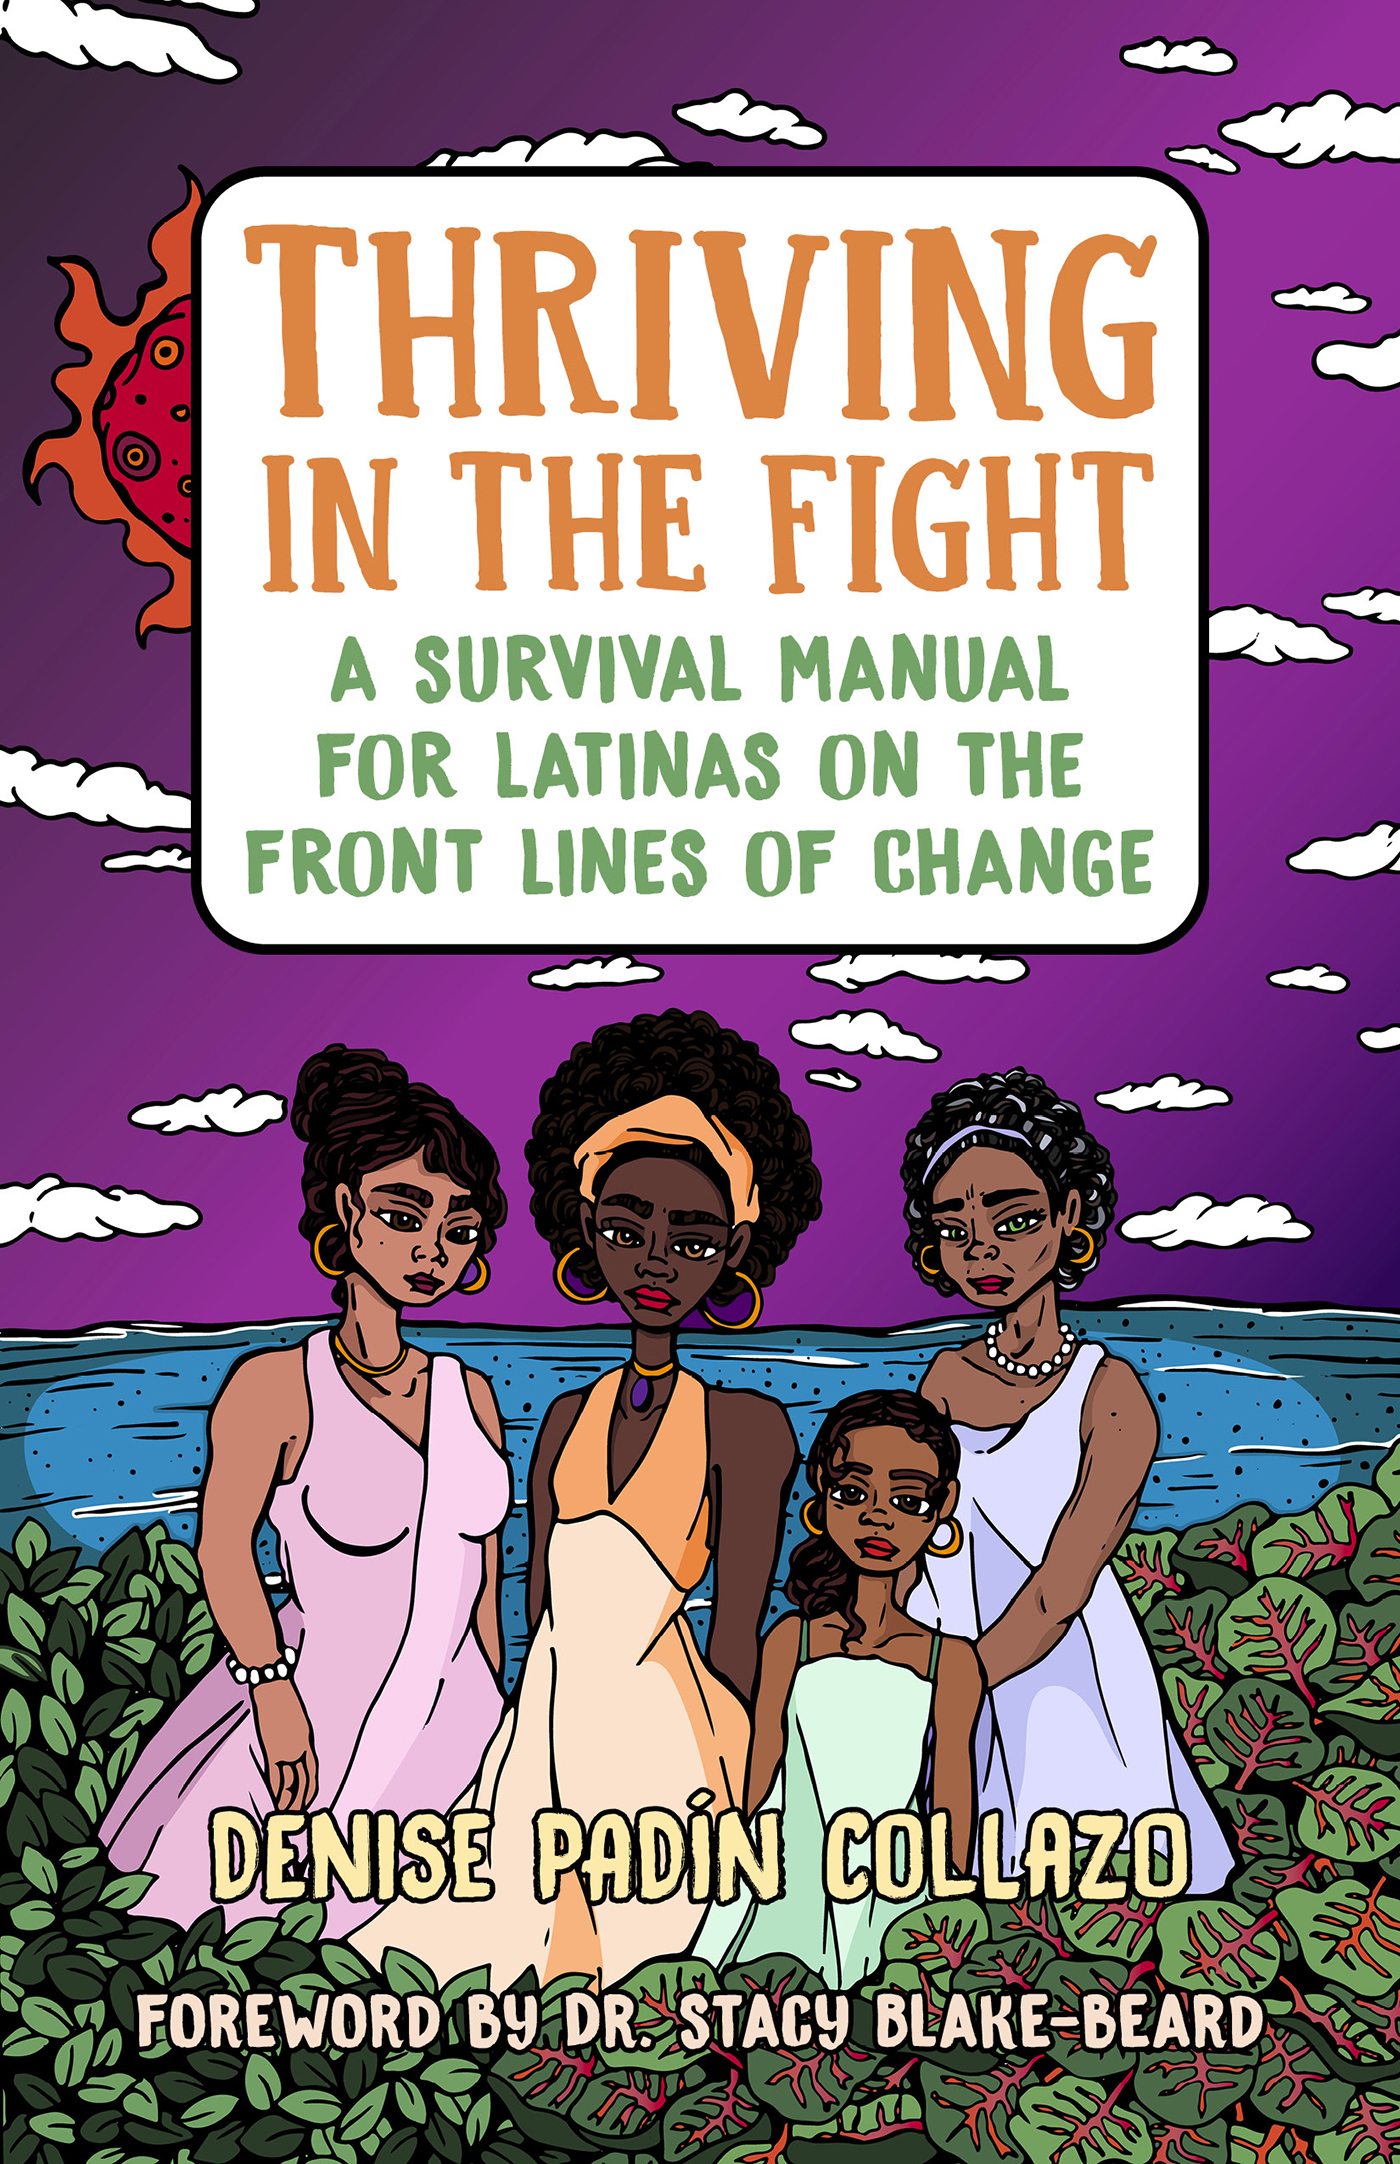 Link to Thriving in the Fight: A Survival Manual for Latinas on the Front Lines of Change by Denise Padín Collazo in the catalog